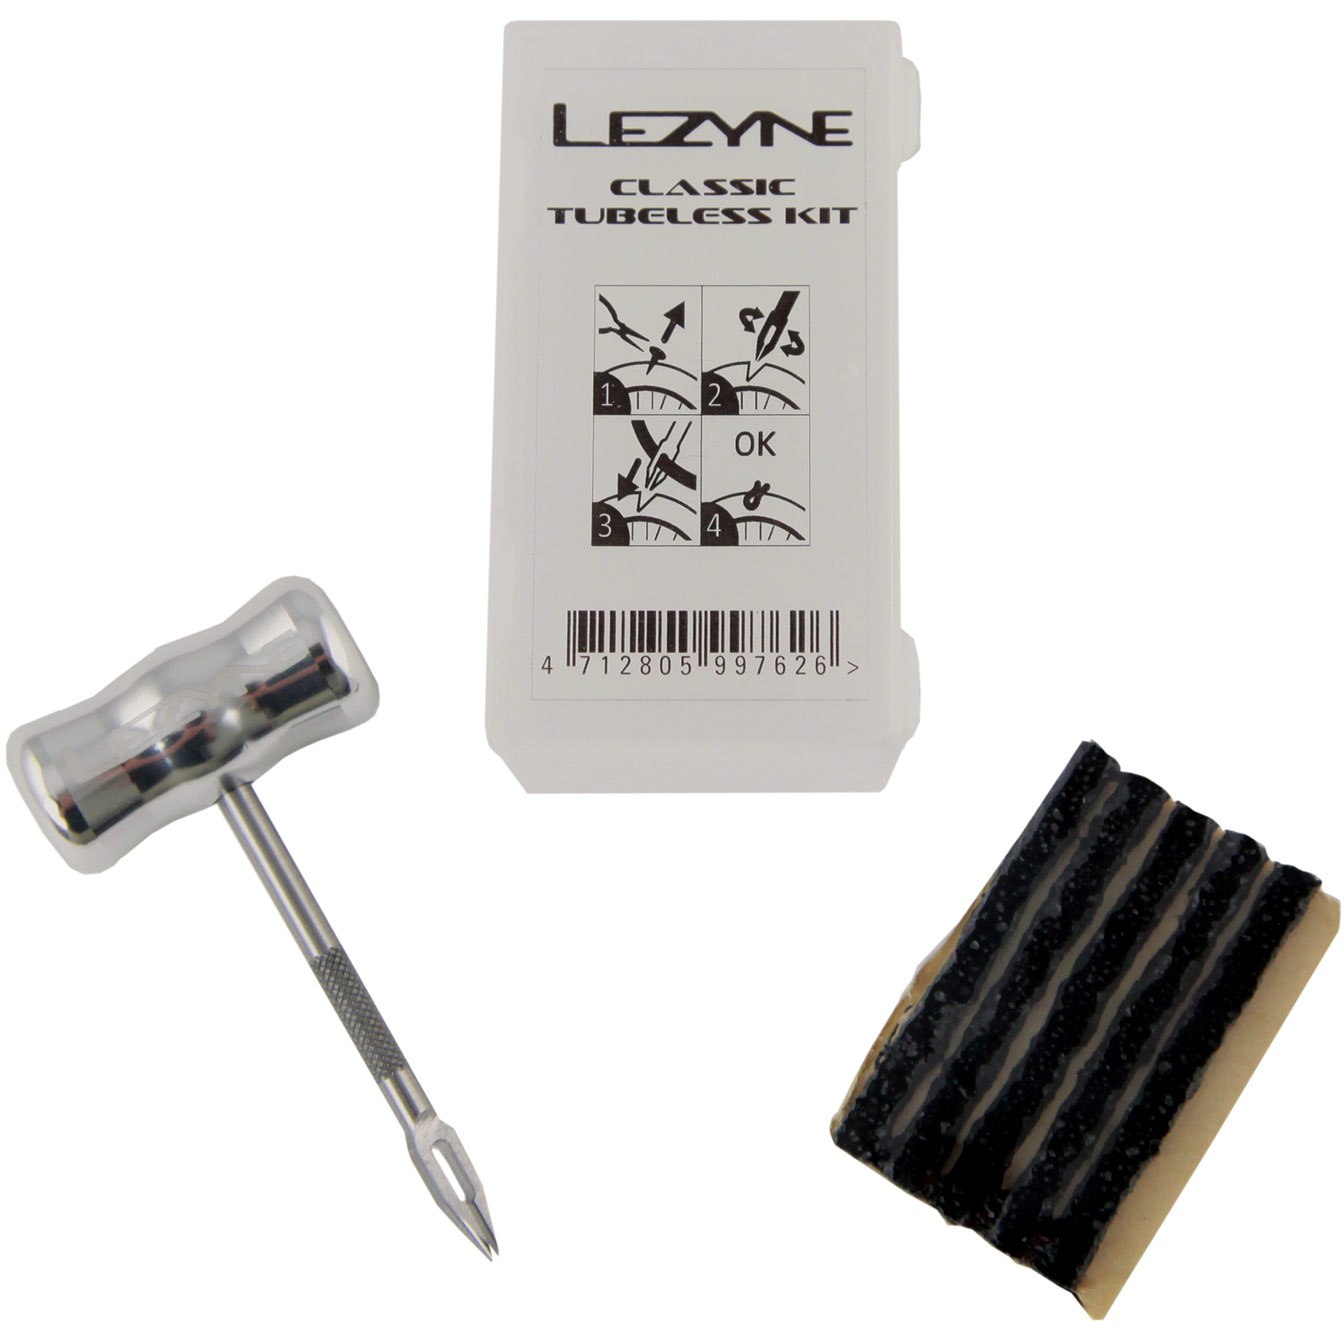 Picture of Lezyne Classic Tubeless Kit for Tubeless Tire Repair